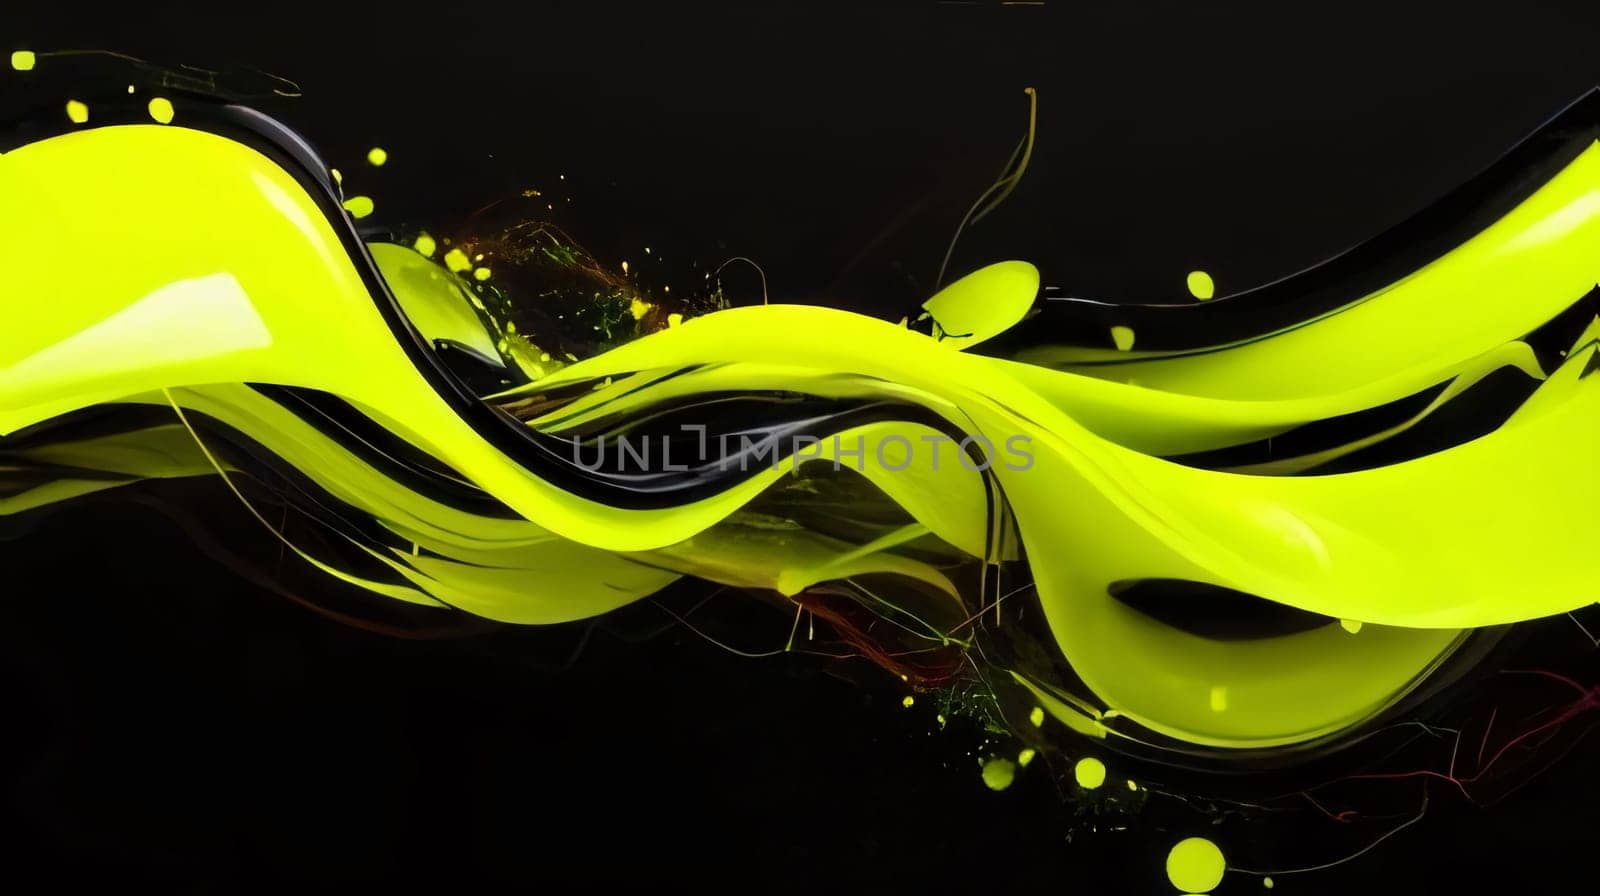 Abstract background design: abstract yellow background with some smooth lines in it and some spots